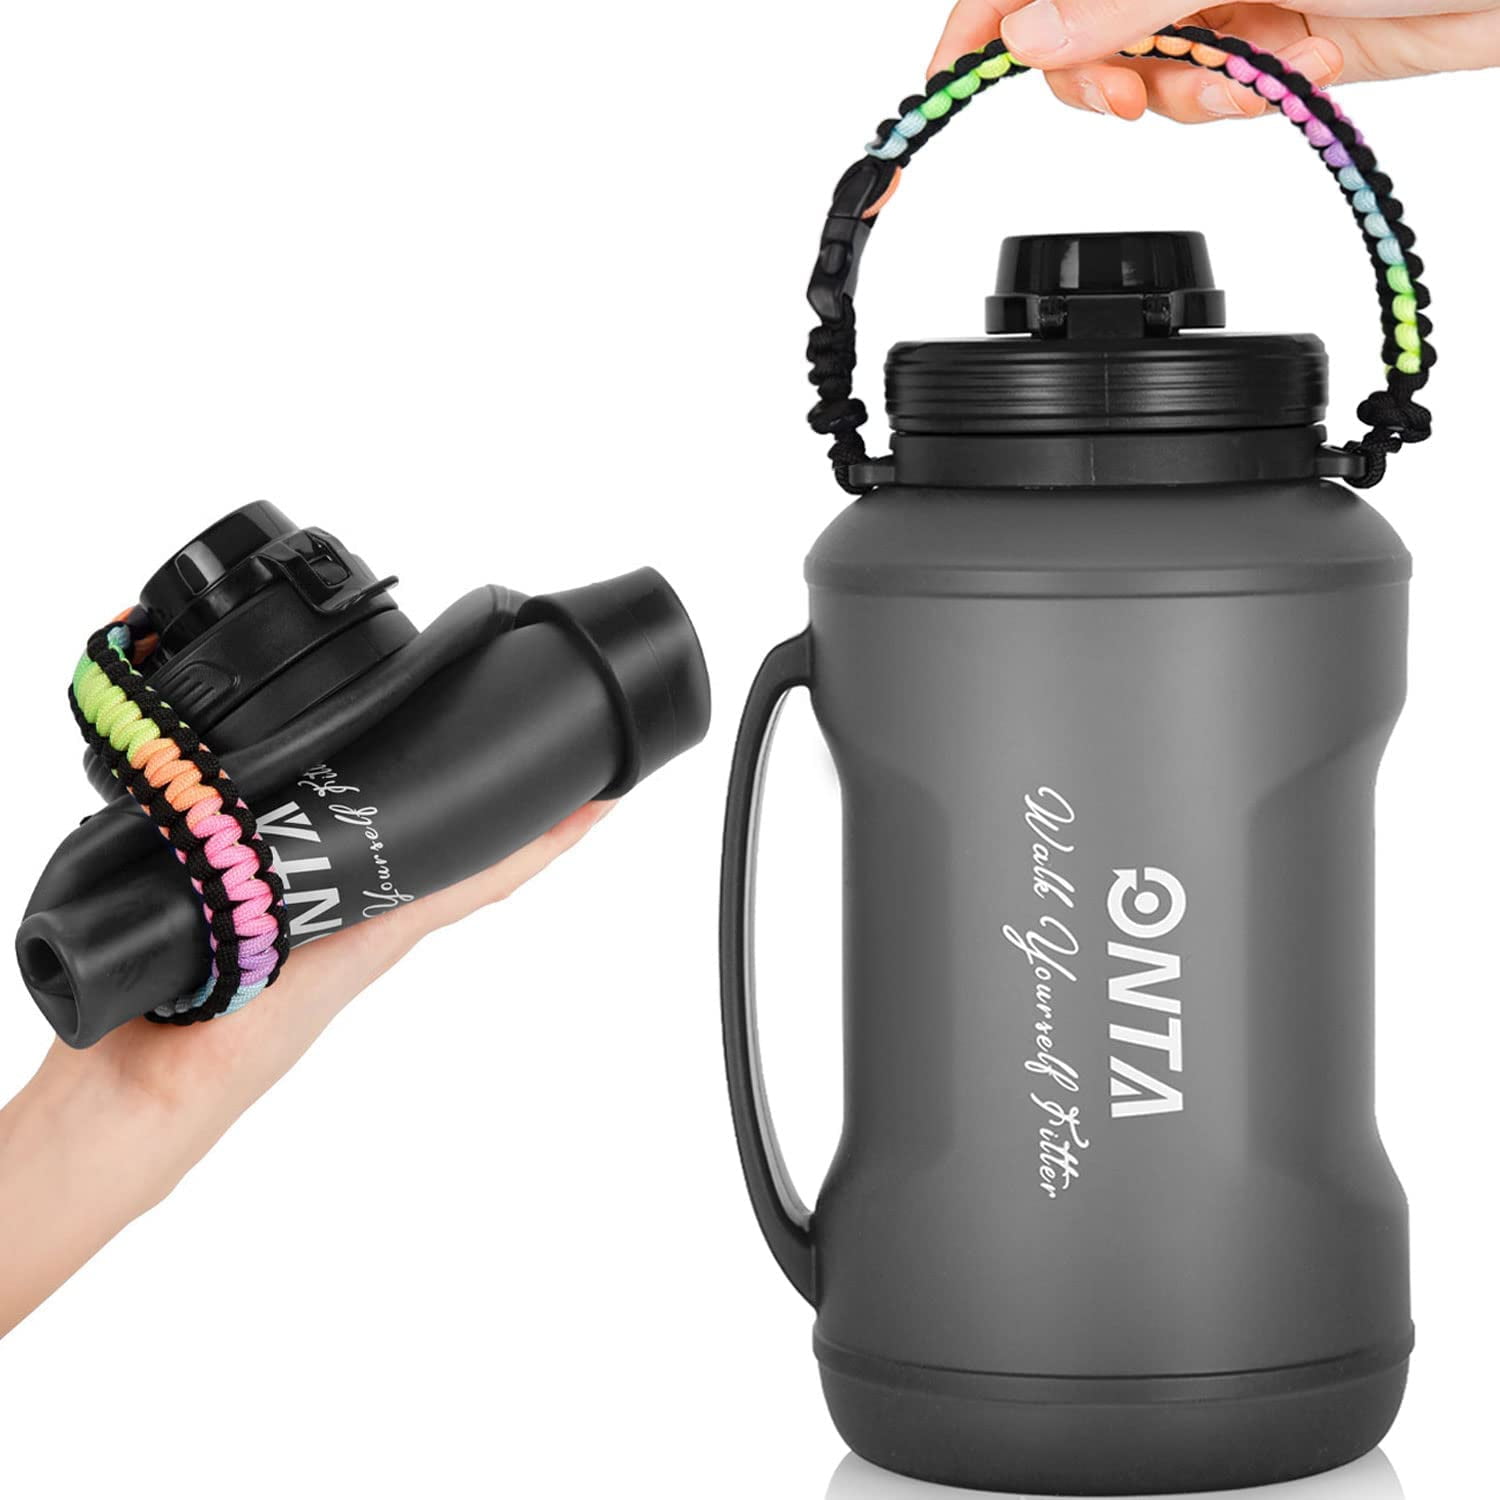 ONTA Collapsible Large Water Bottle - BPA Free Silicone Reusable Flat Water  Cup with Straw Paracord Handle Airplane Travel Essential Flask Lightweight